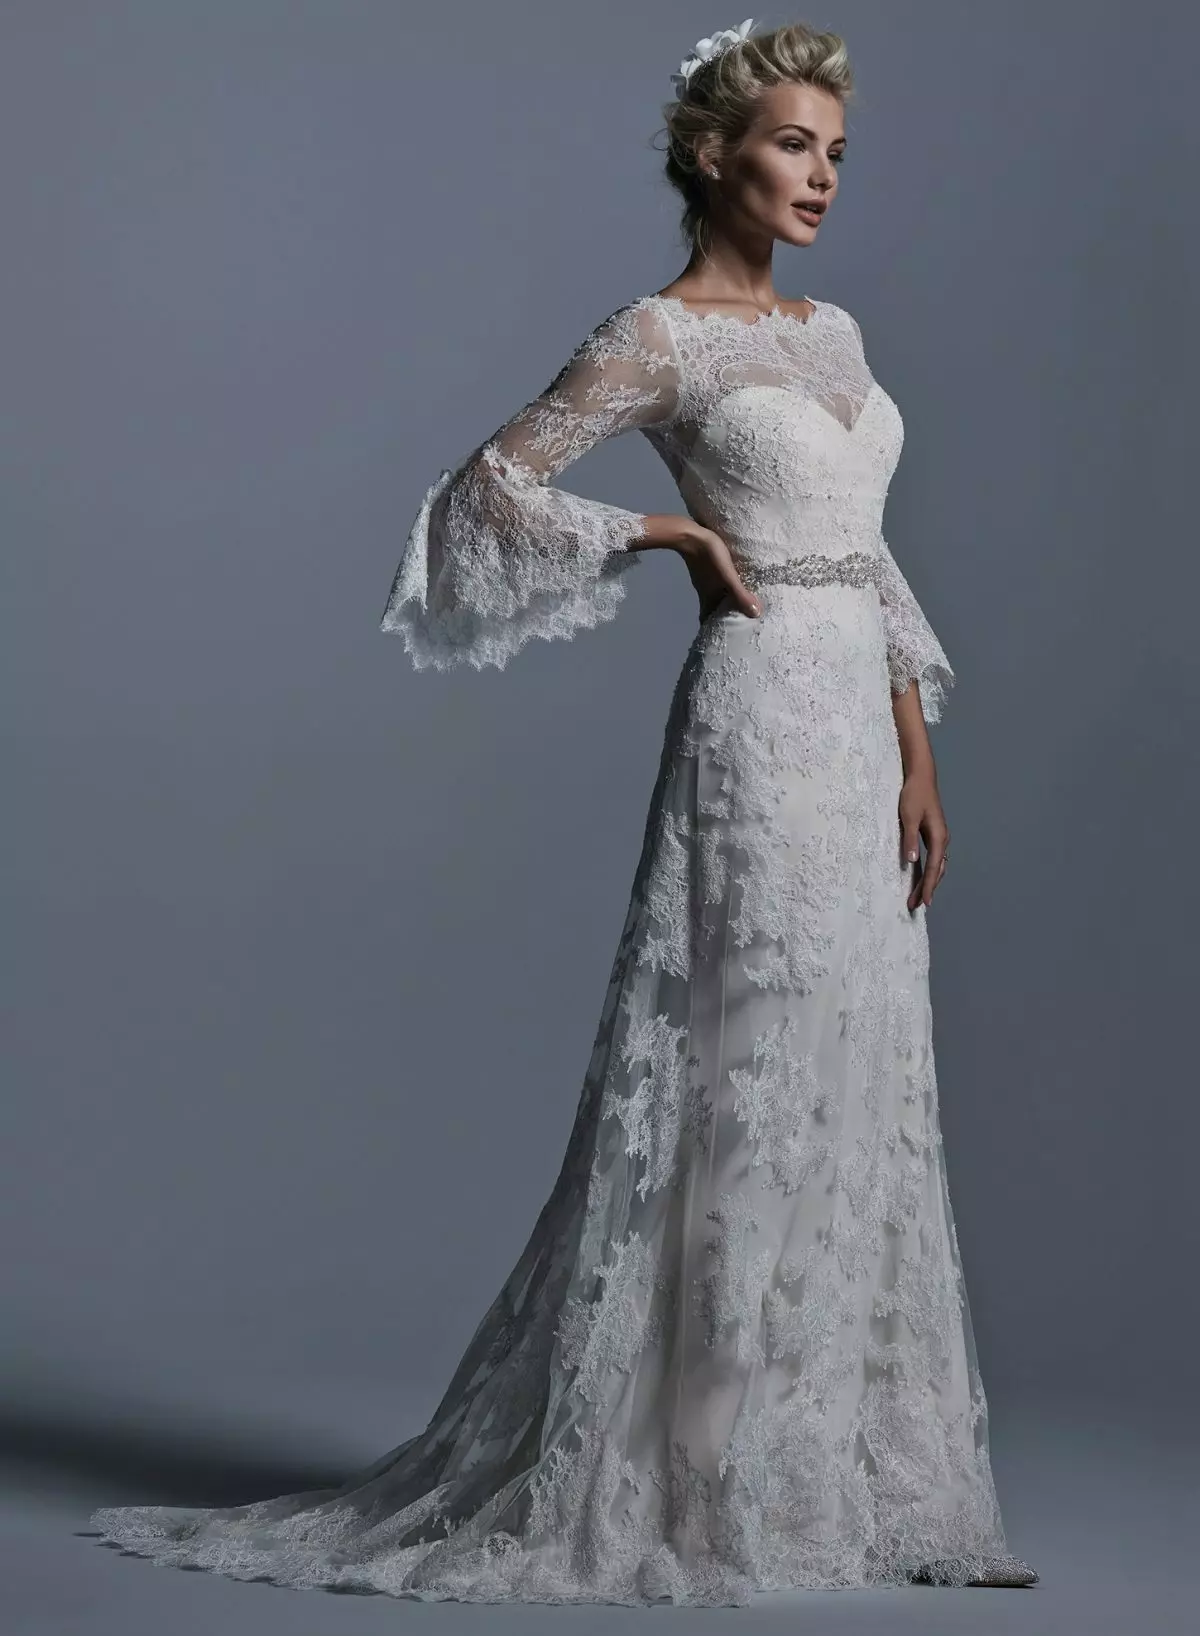 Lace Wedding Dress With Sleeves in Vintage Style